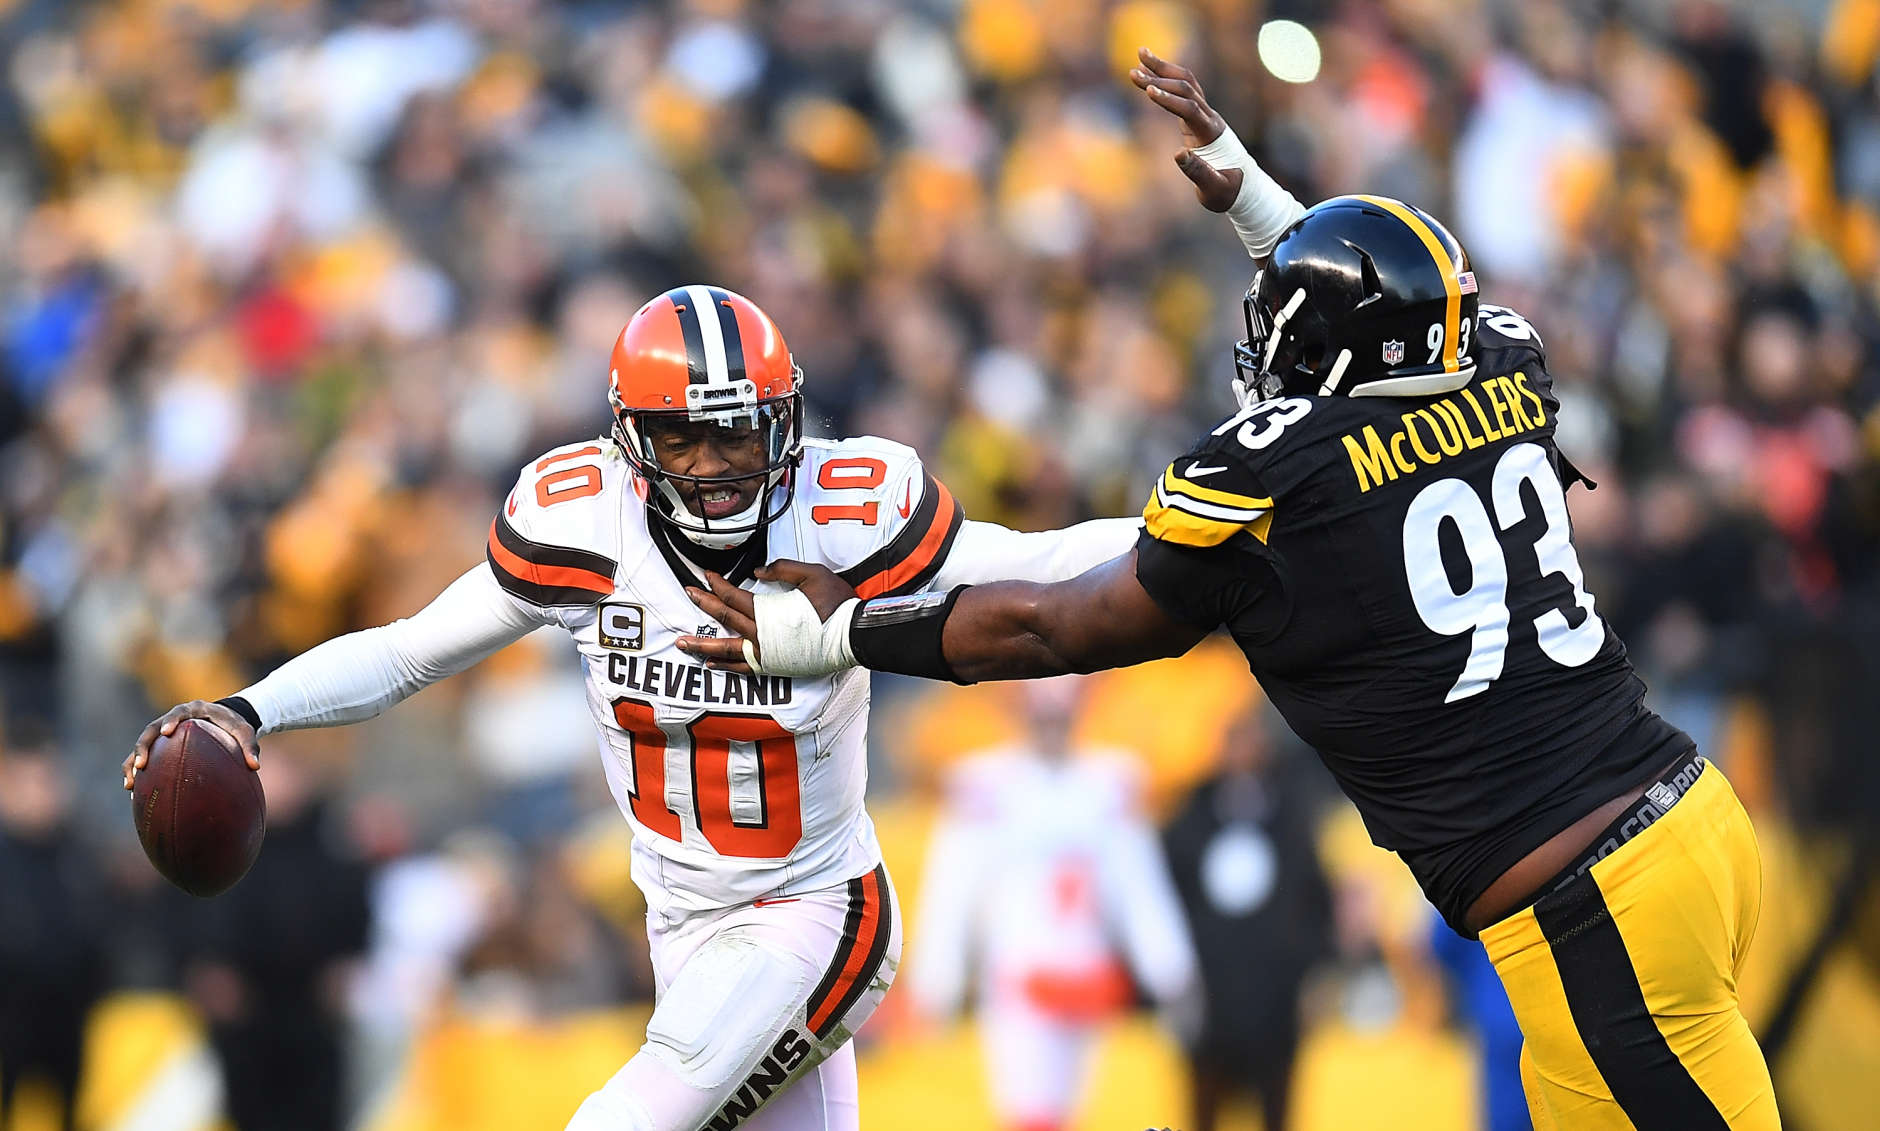 PITTSBURGH, PA - JANUARY 01:  Robert Griffin III #10 of the Cleveland Browns tries to avoid the oncoming rush of Dan McCullers-Sanders #93 of the Pittsburgh Steelers in the overtime period during the game at Heinz Field on January 1, 2017 in Pittsburgh, Pennsylvania. (Photo by Joe Sargent/Getty Images)